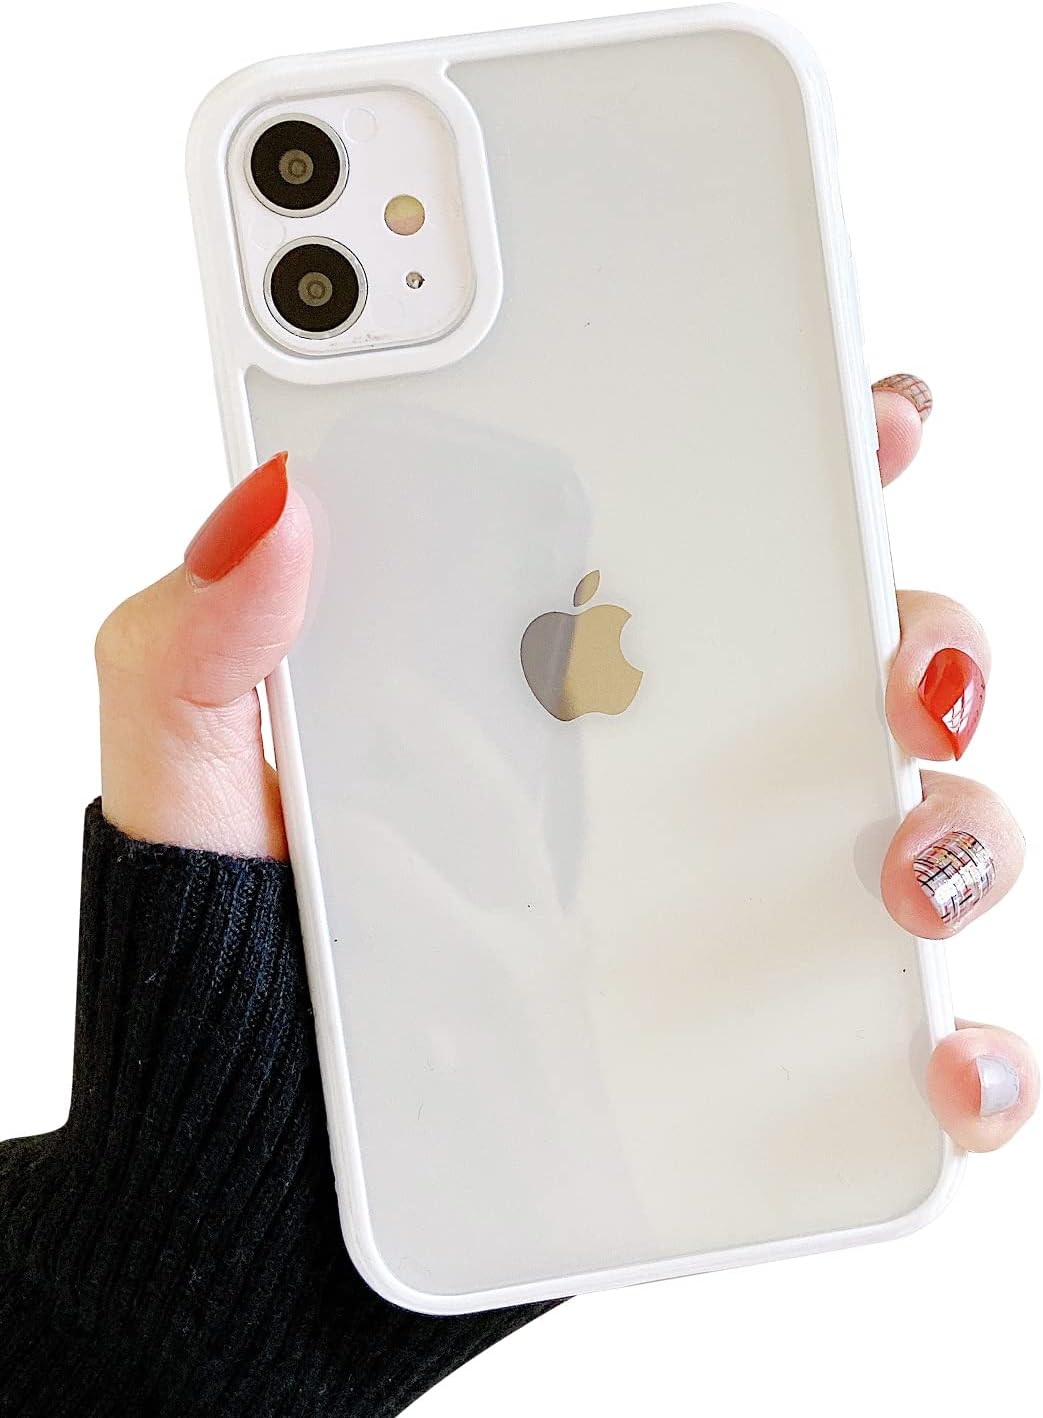 ztofera crystal clear case review